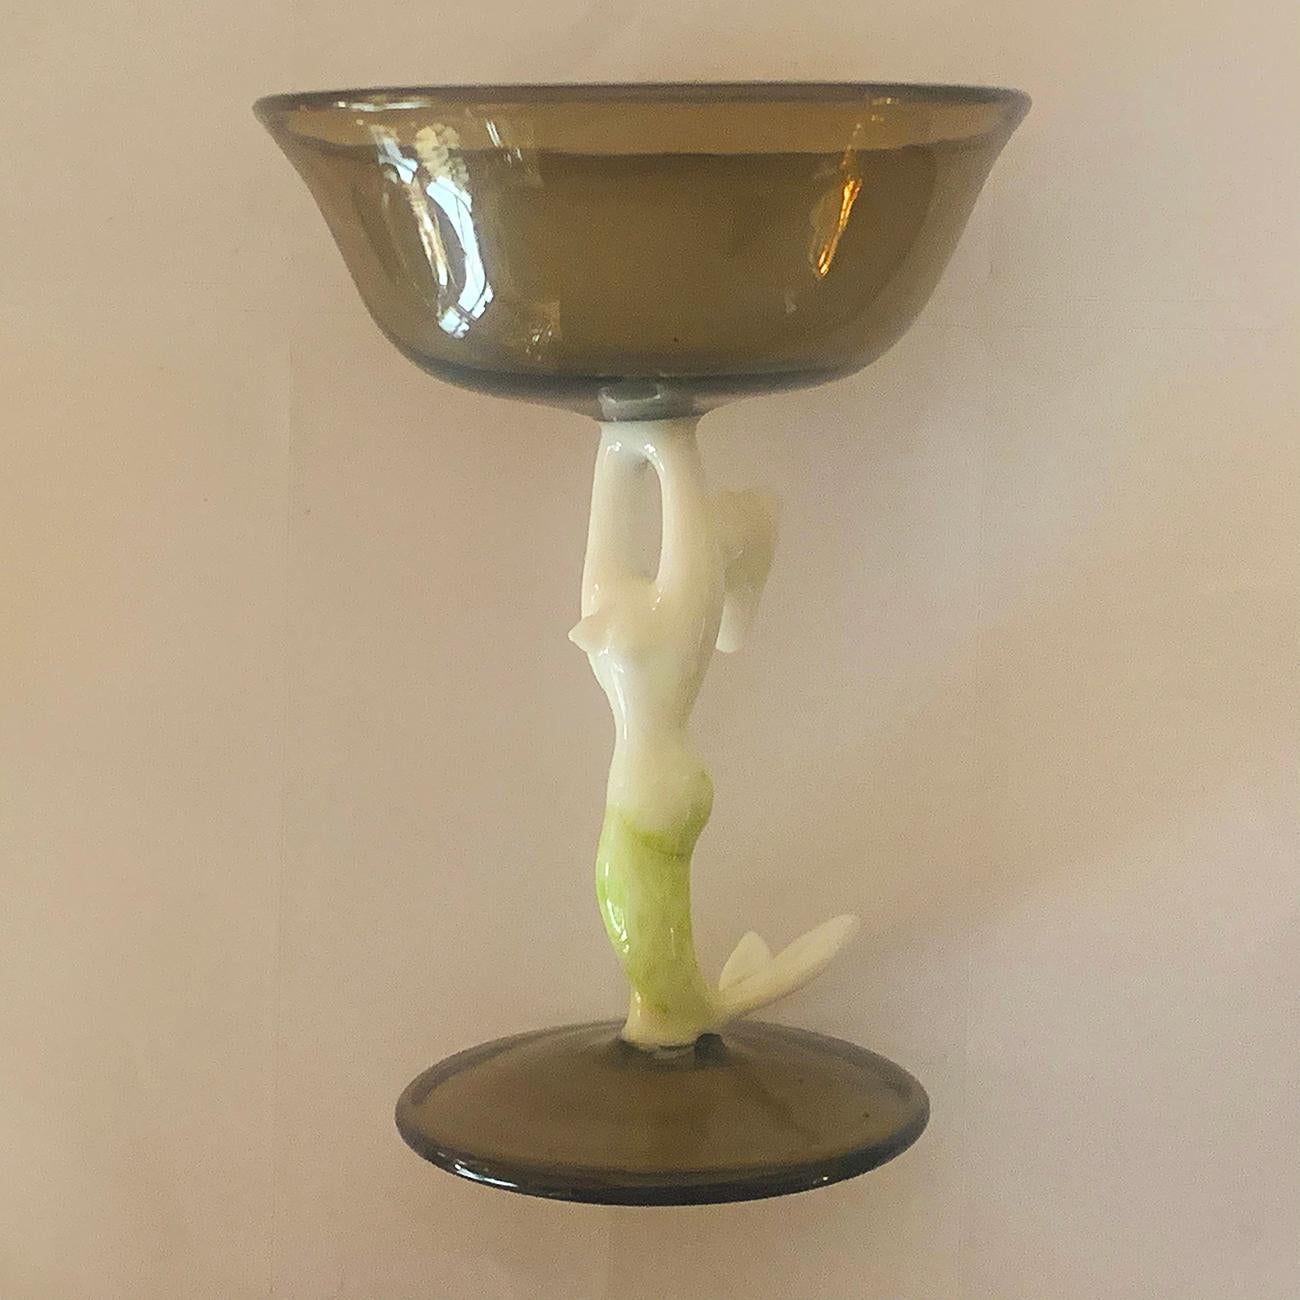 Art Deco Bimini Werkstatte mermaid decanter set with 2 mermaid glasses, in the very finest of glass, in intricate design of white Mermaids with a touch of green to tails, both within the decanter and as stems to the Liquor Glasses. The glass is so